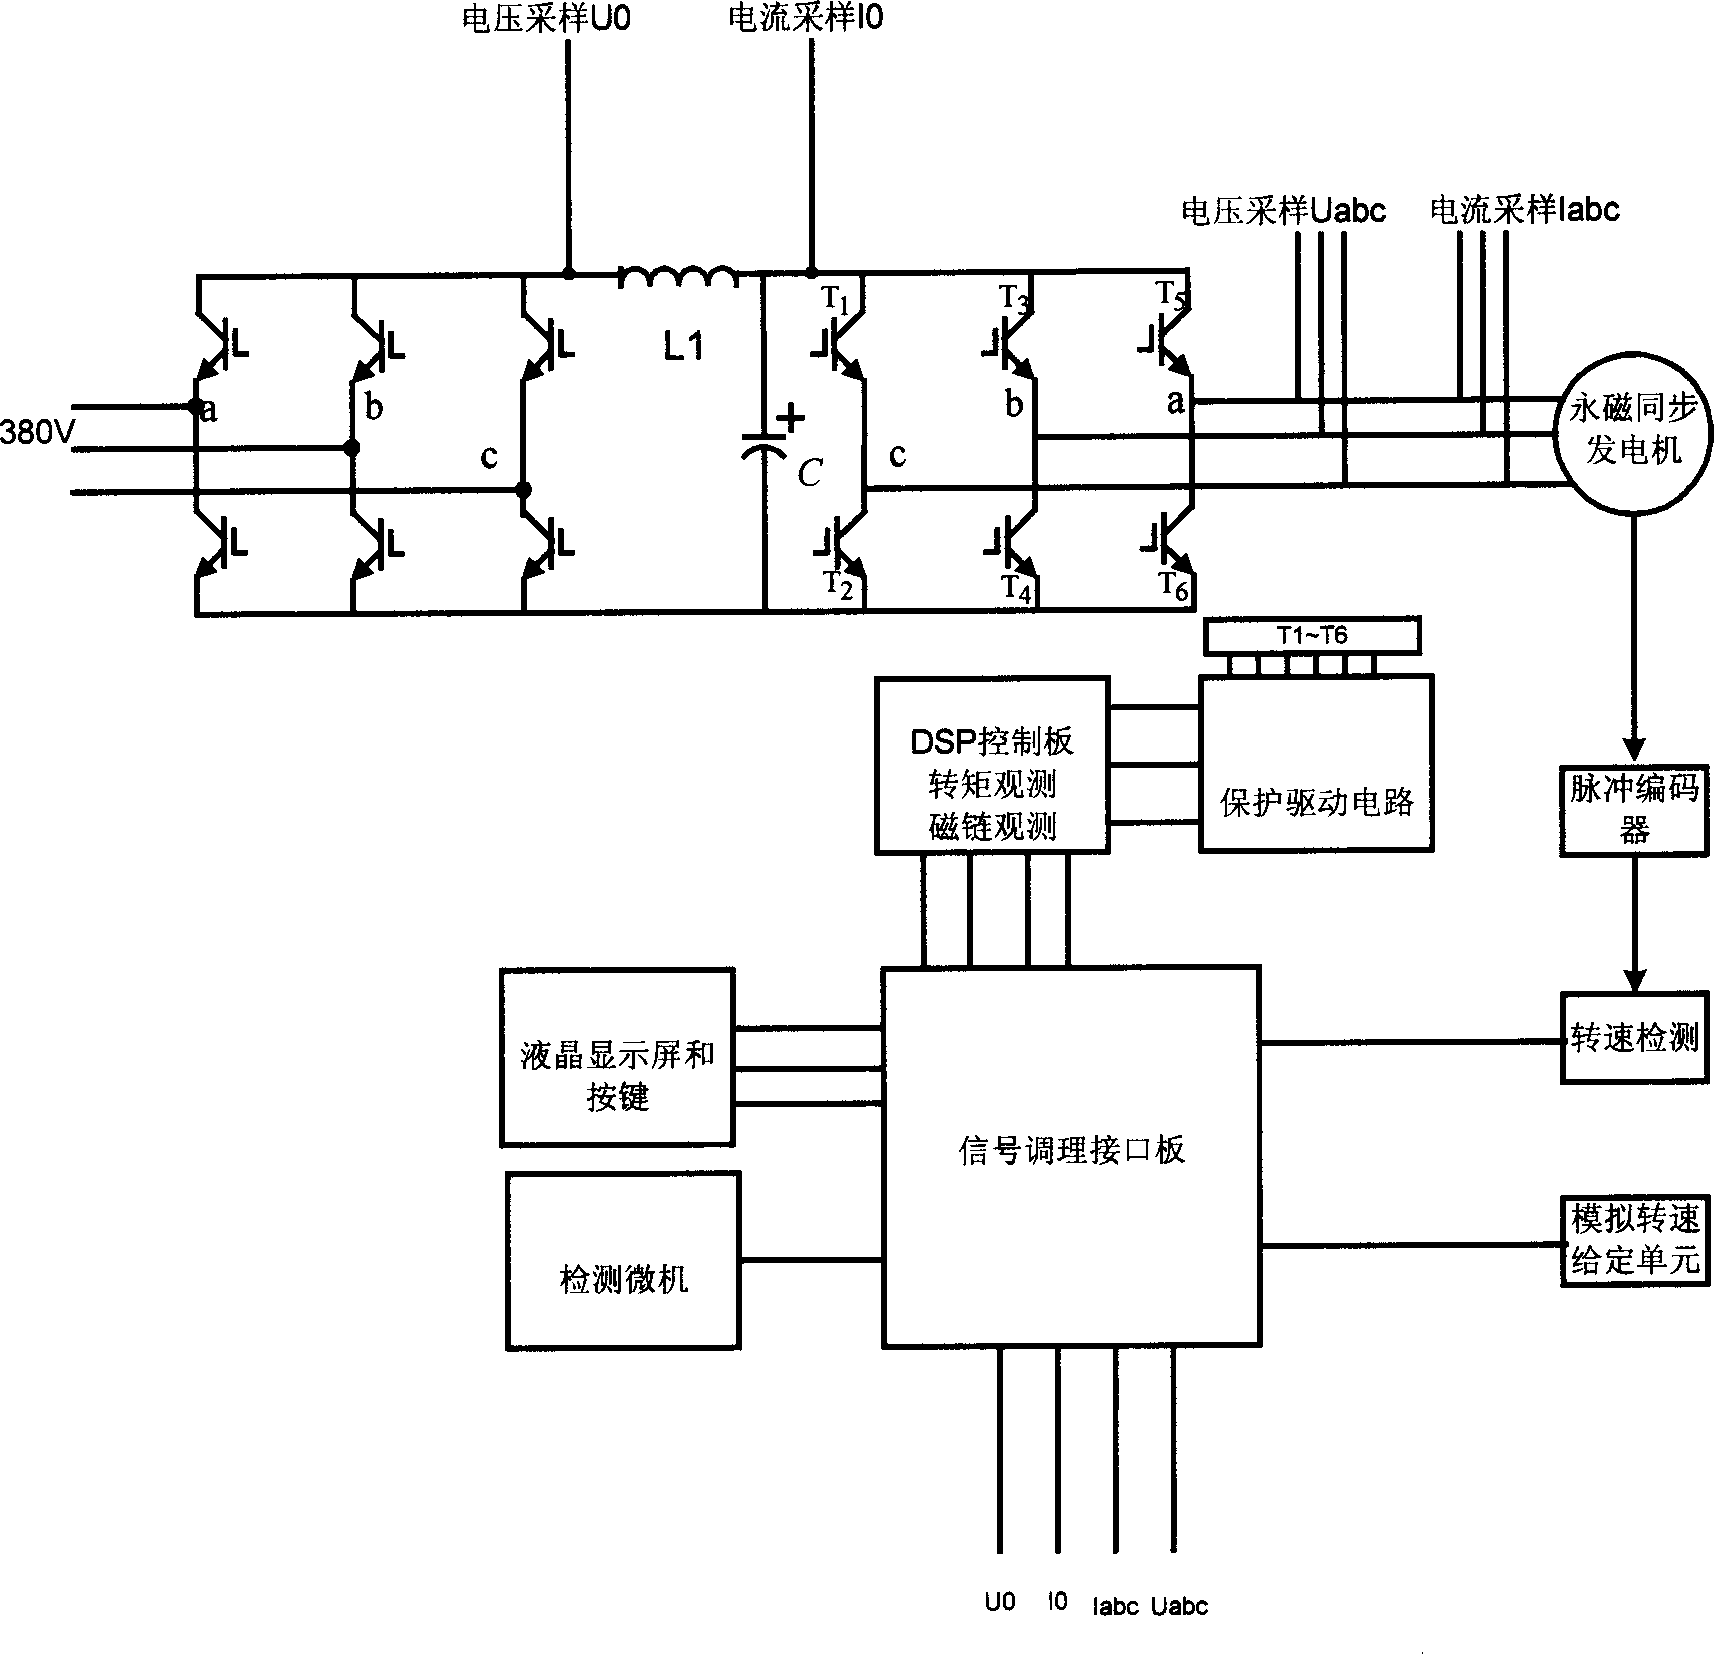 Control structure of full power type AC-DC-AC converter for wind power generation